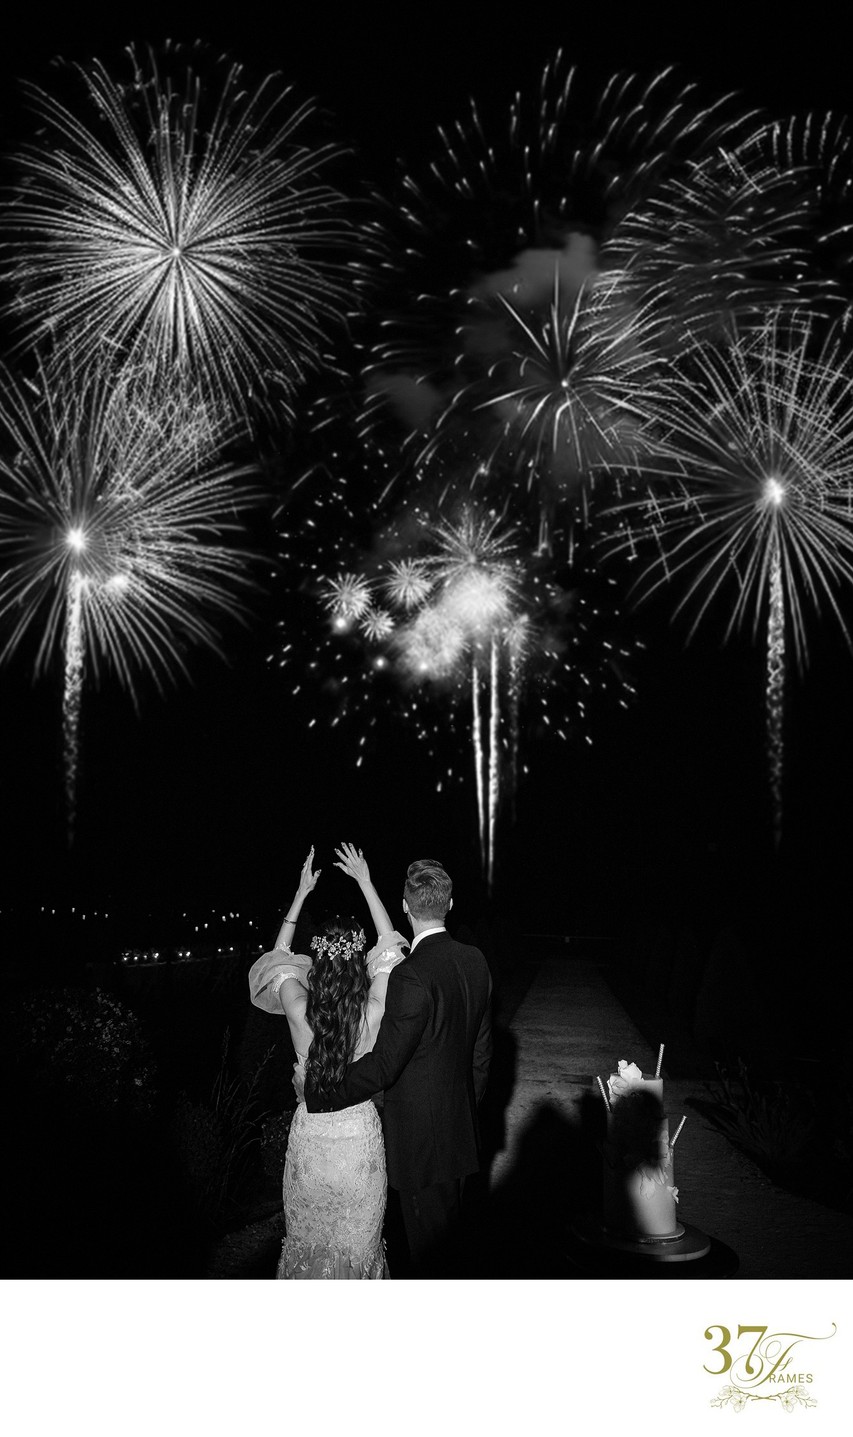 Fireworks Spectacular Delights Guests Château wedding